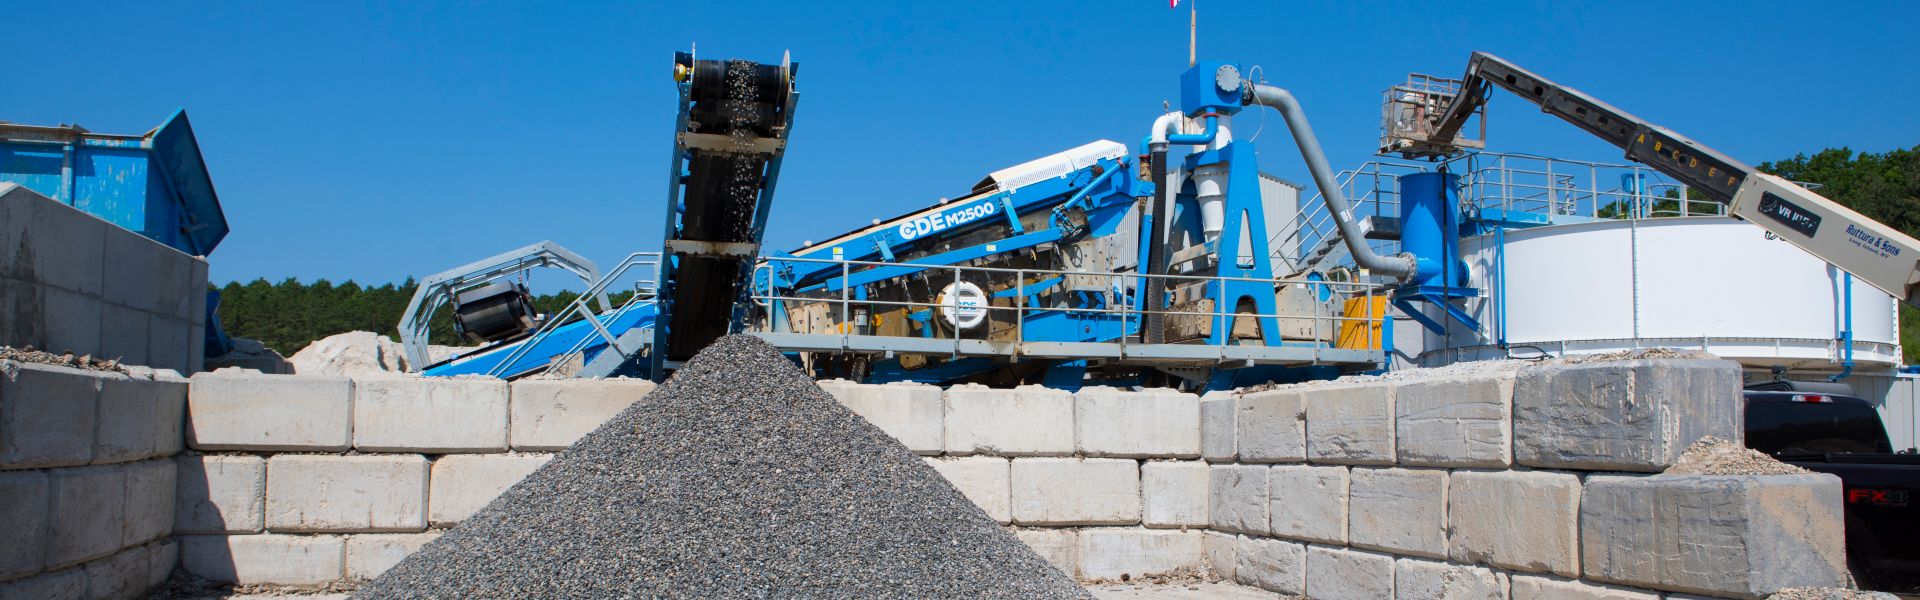 Crushed Concrete Recycling